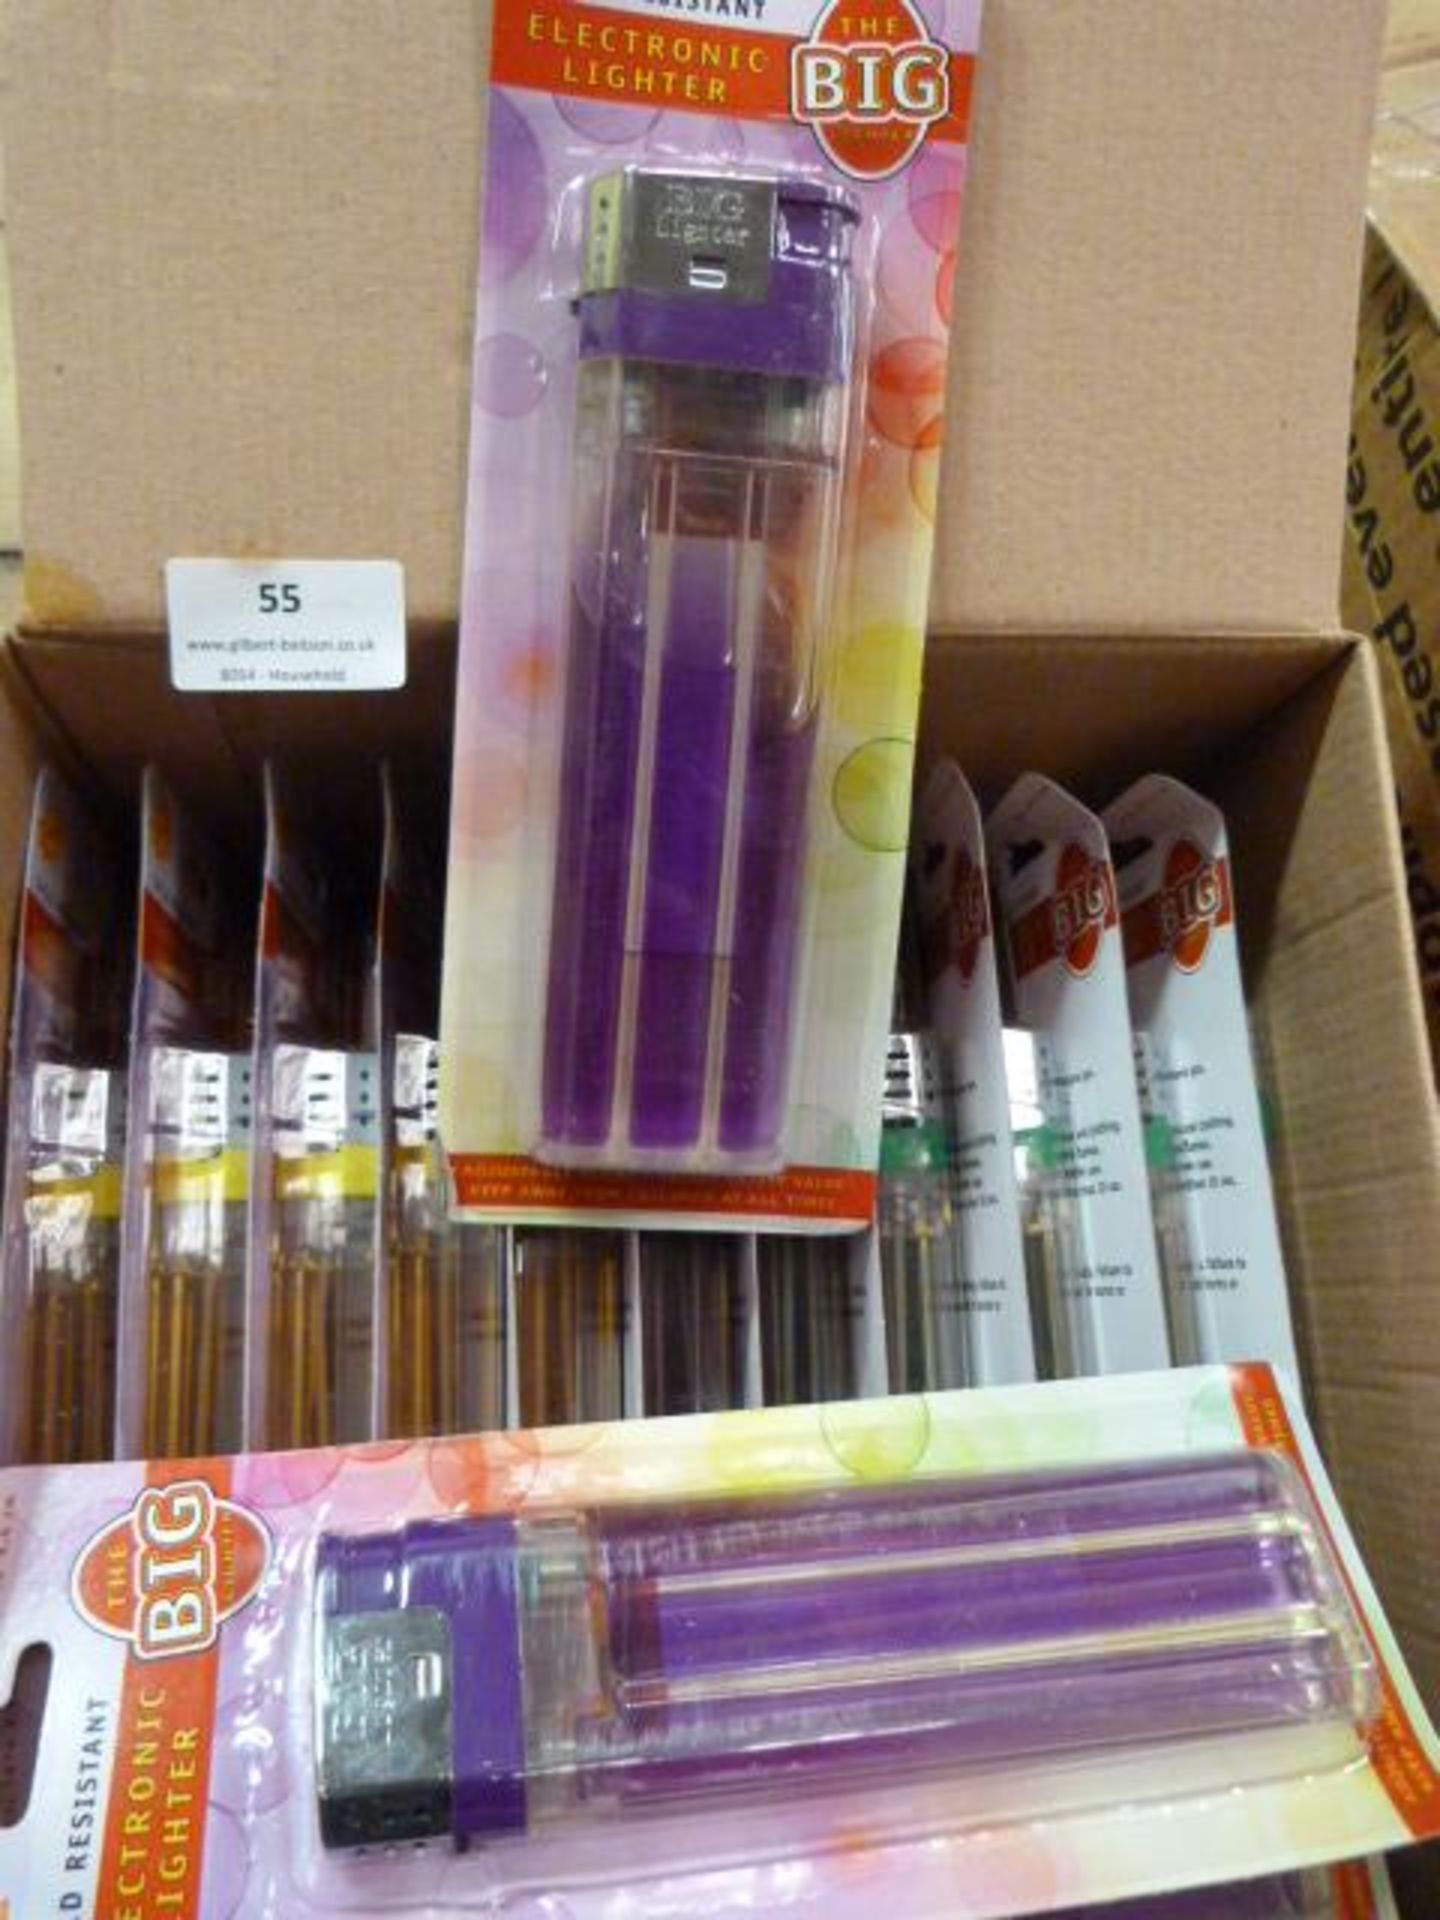 Box of "Big" Electronic Lighters